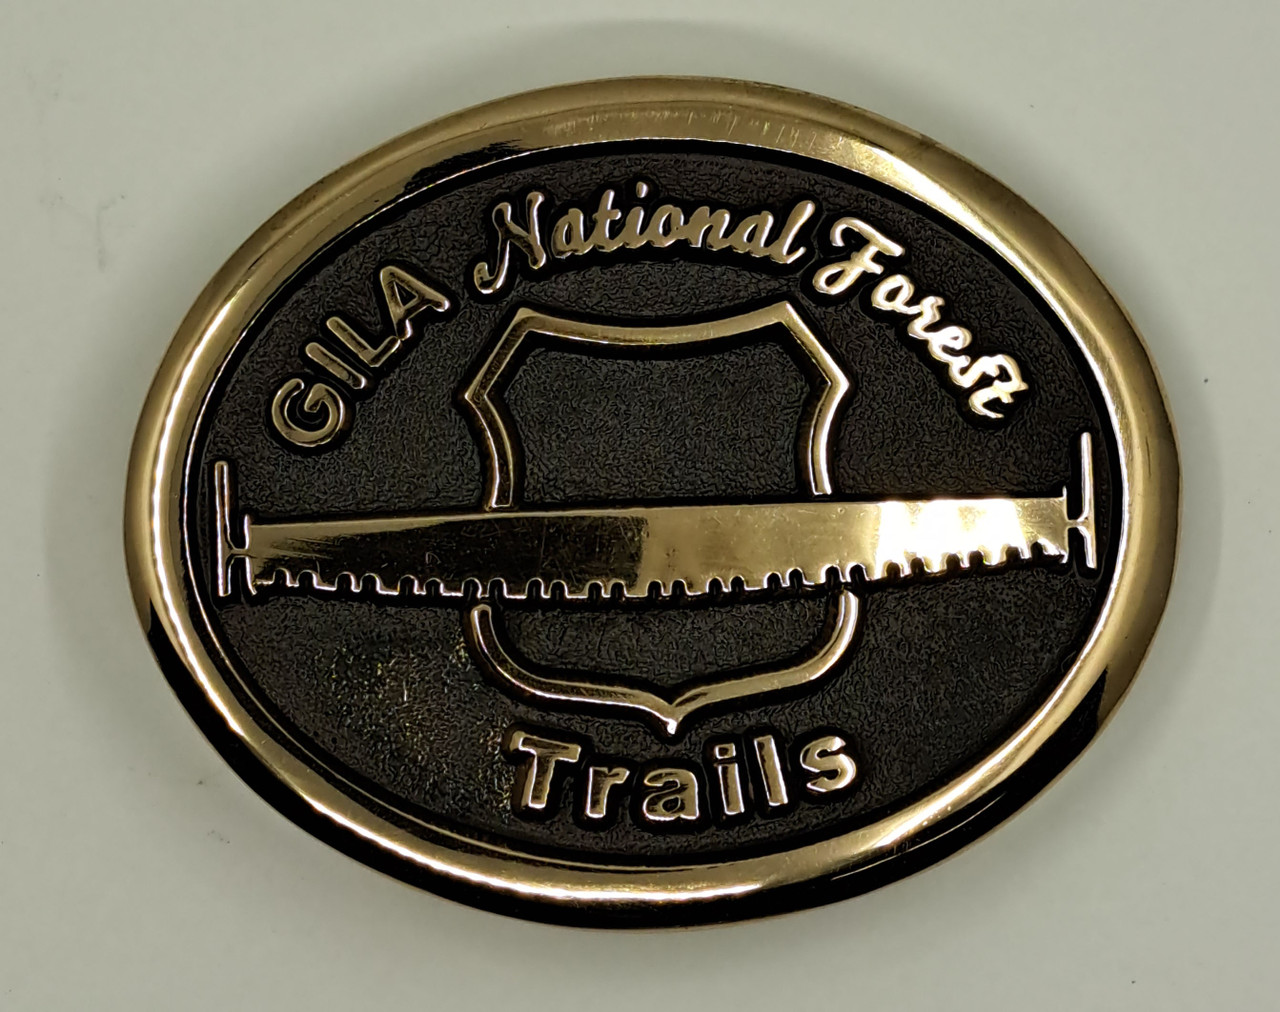 Gila National Forest Trails Buckle (RESTRICTED)